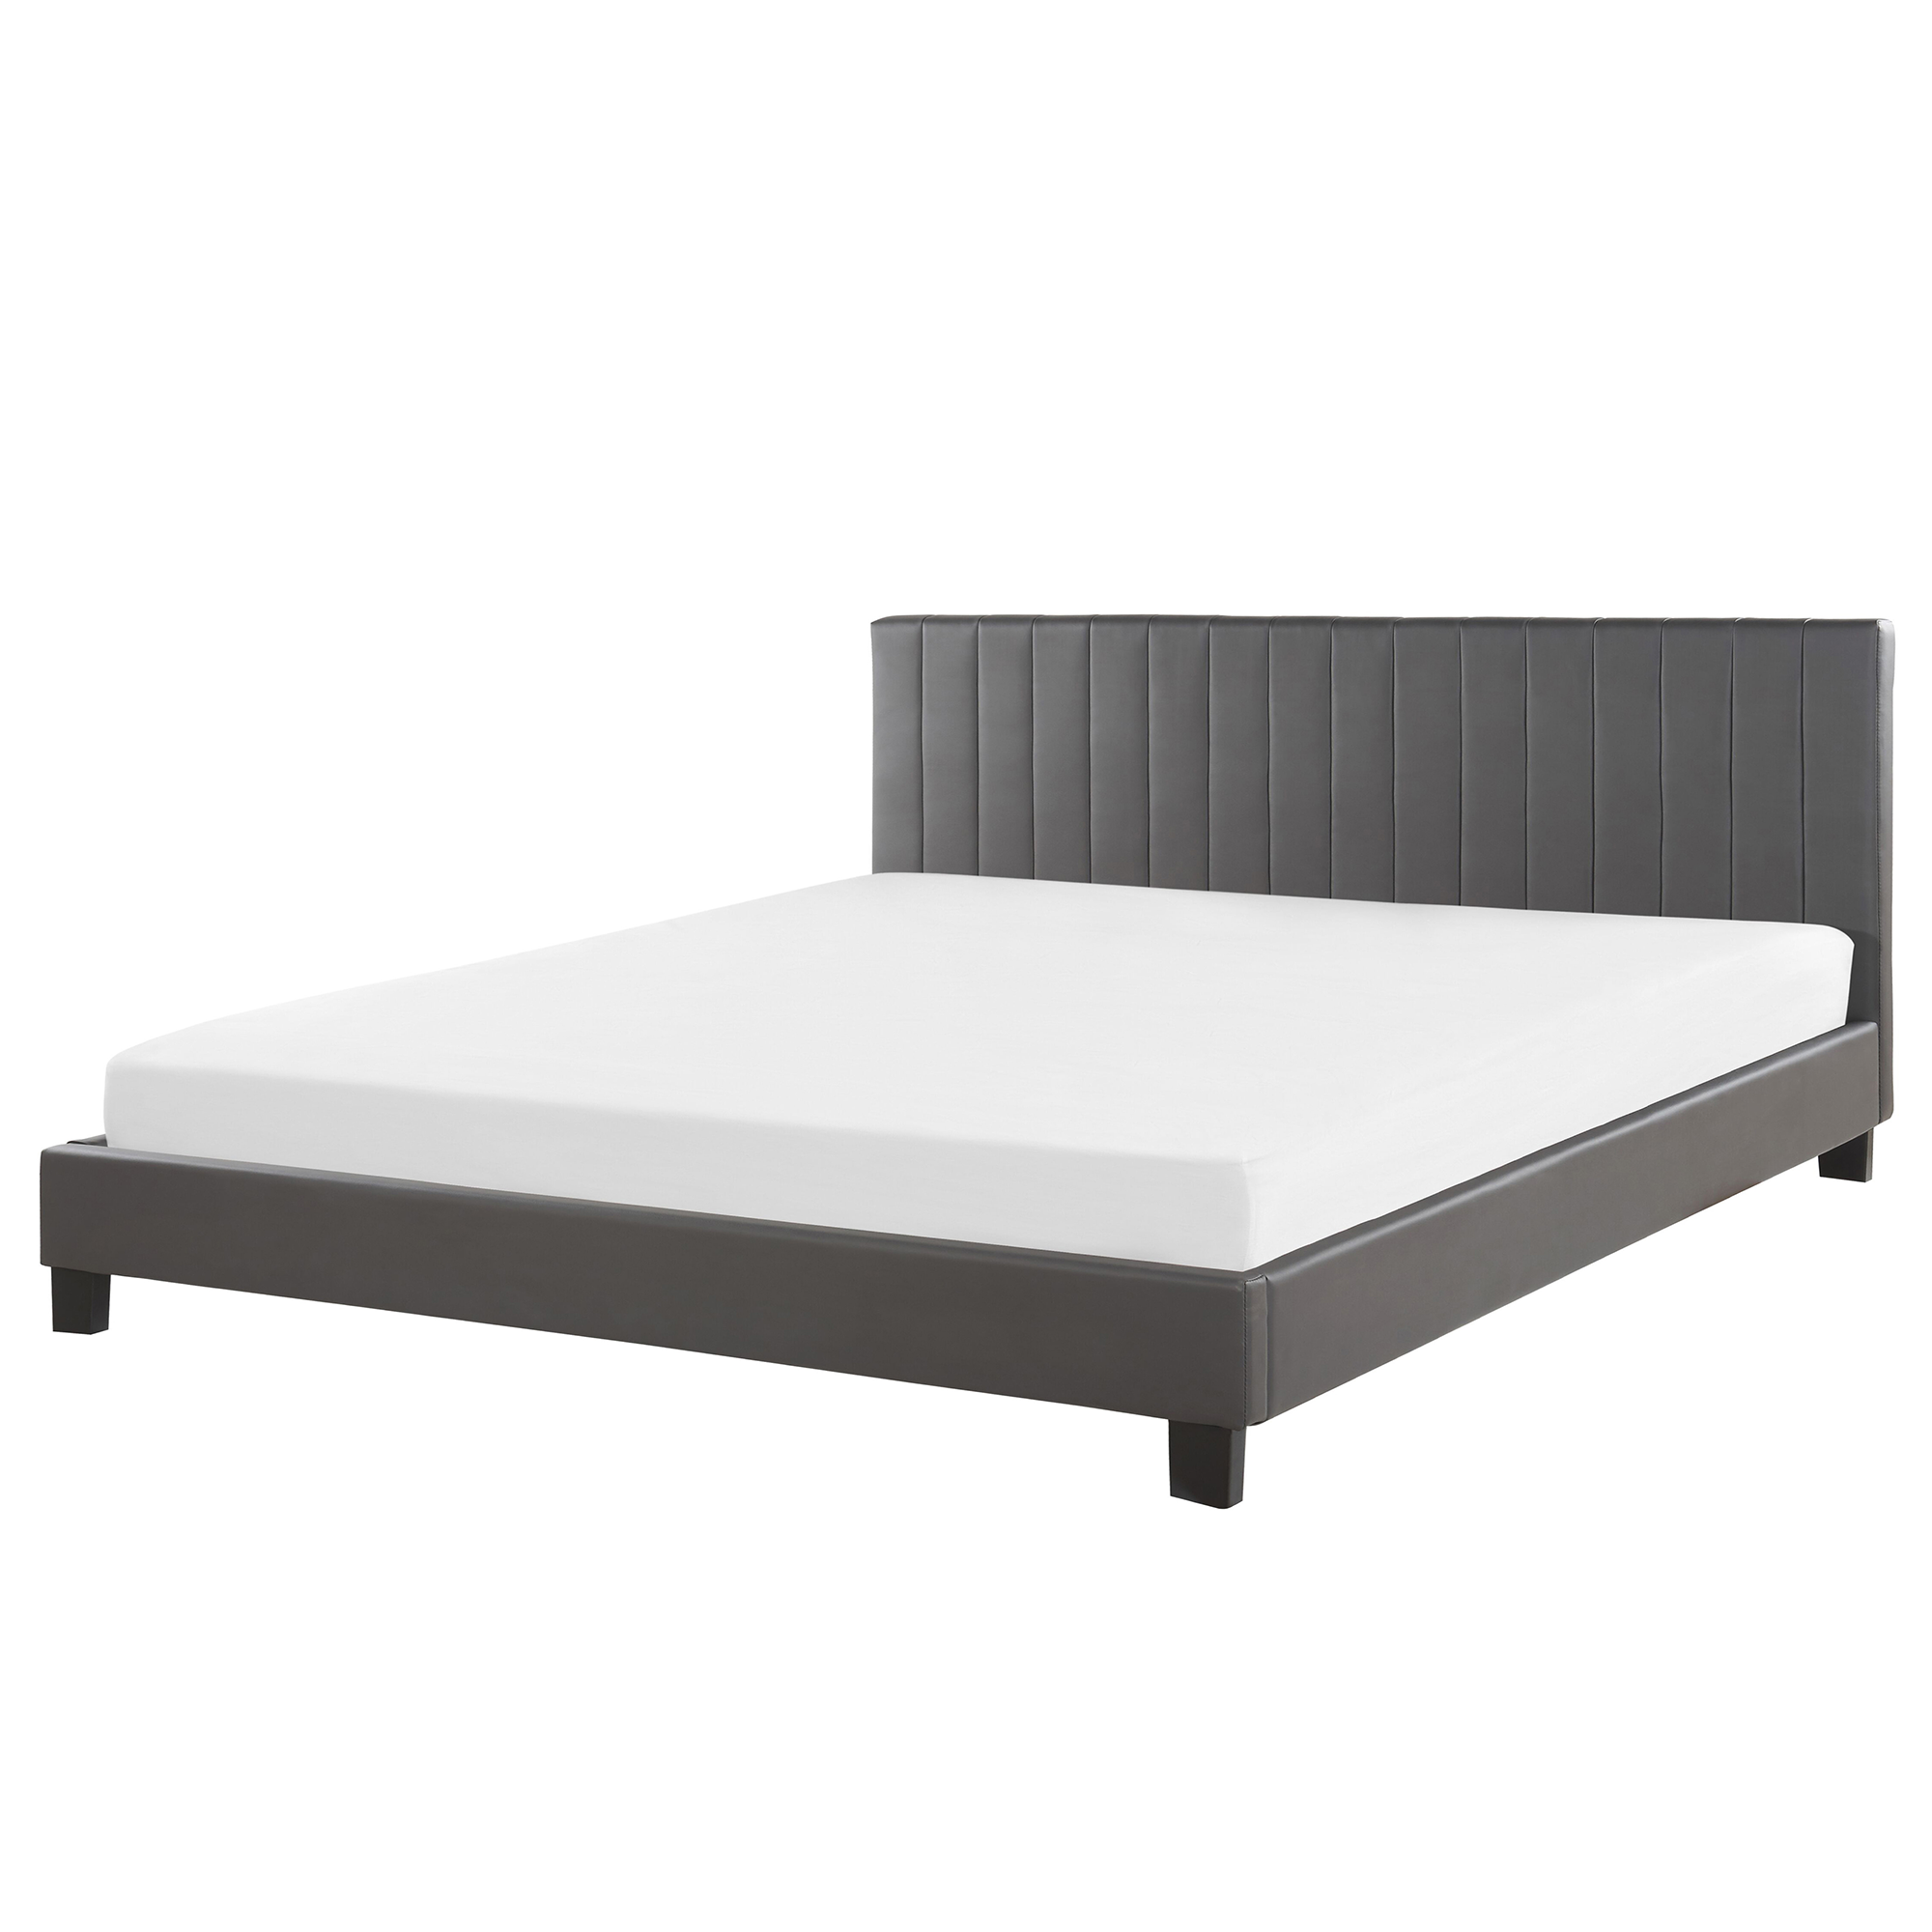 Beliani Panel Bed Grey Faux Leather Upholstery EU Super King Size 6ft with Slatted Base Headboard